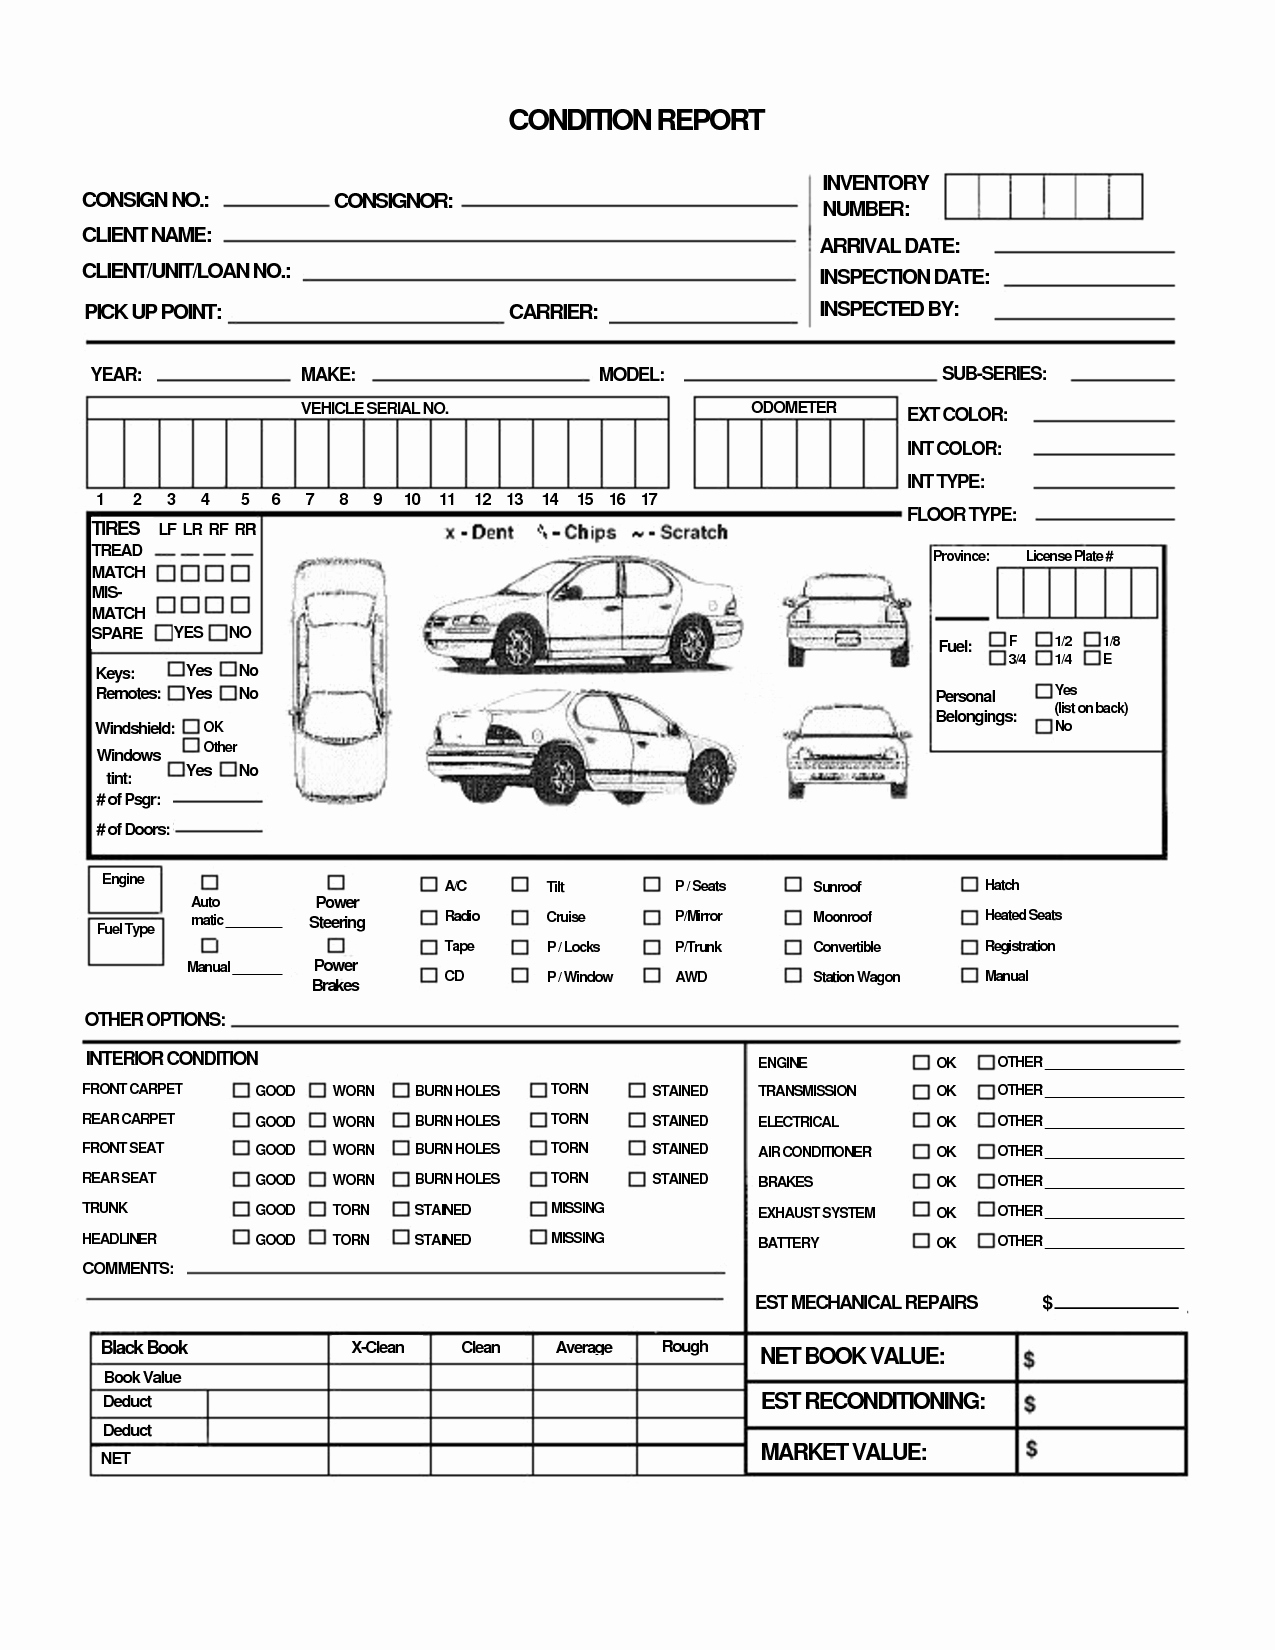 Vehicle Condition Report Template Elegant form Vehicle Condition Report form Vehicle Condition